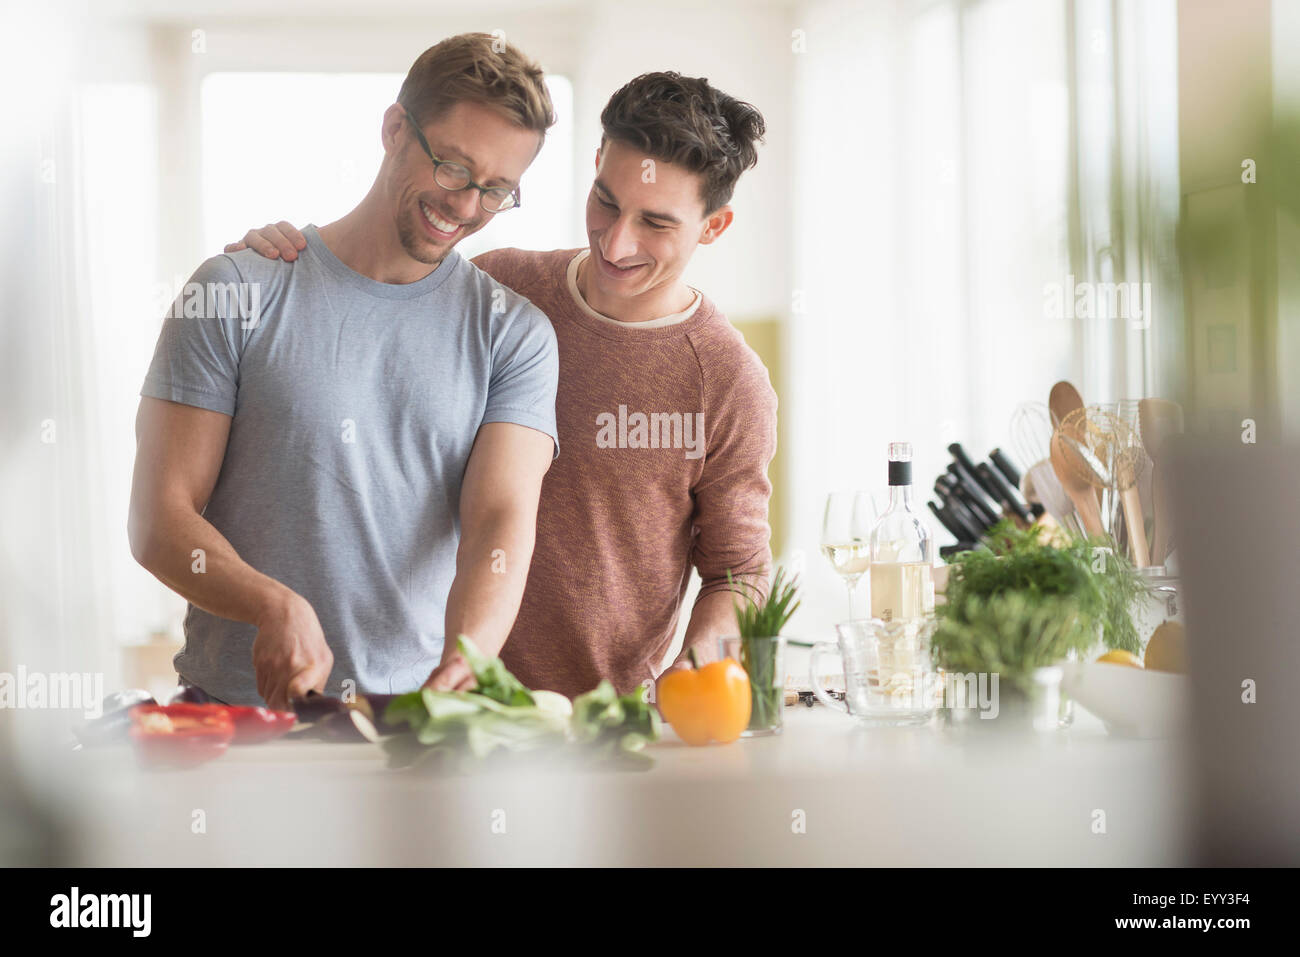 Caucasian couple gay cooking in kitchen Banque D'Images